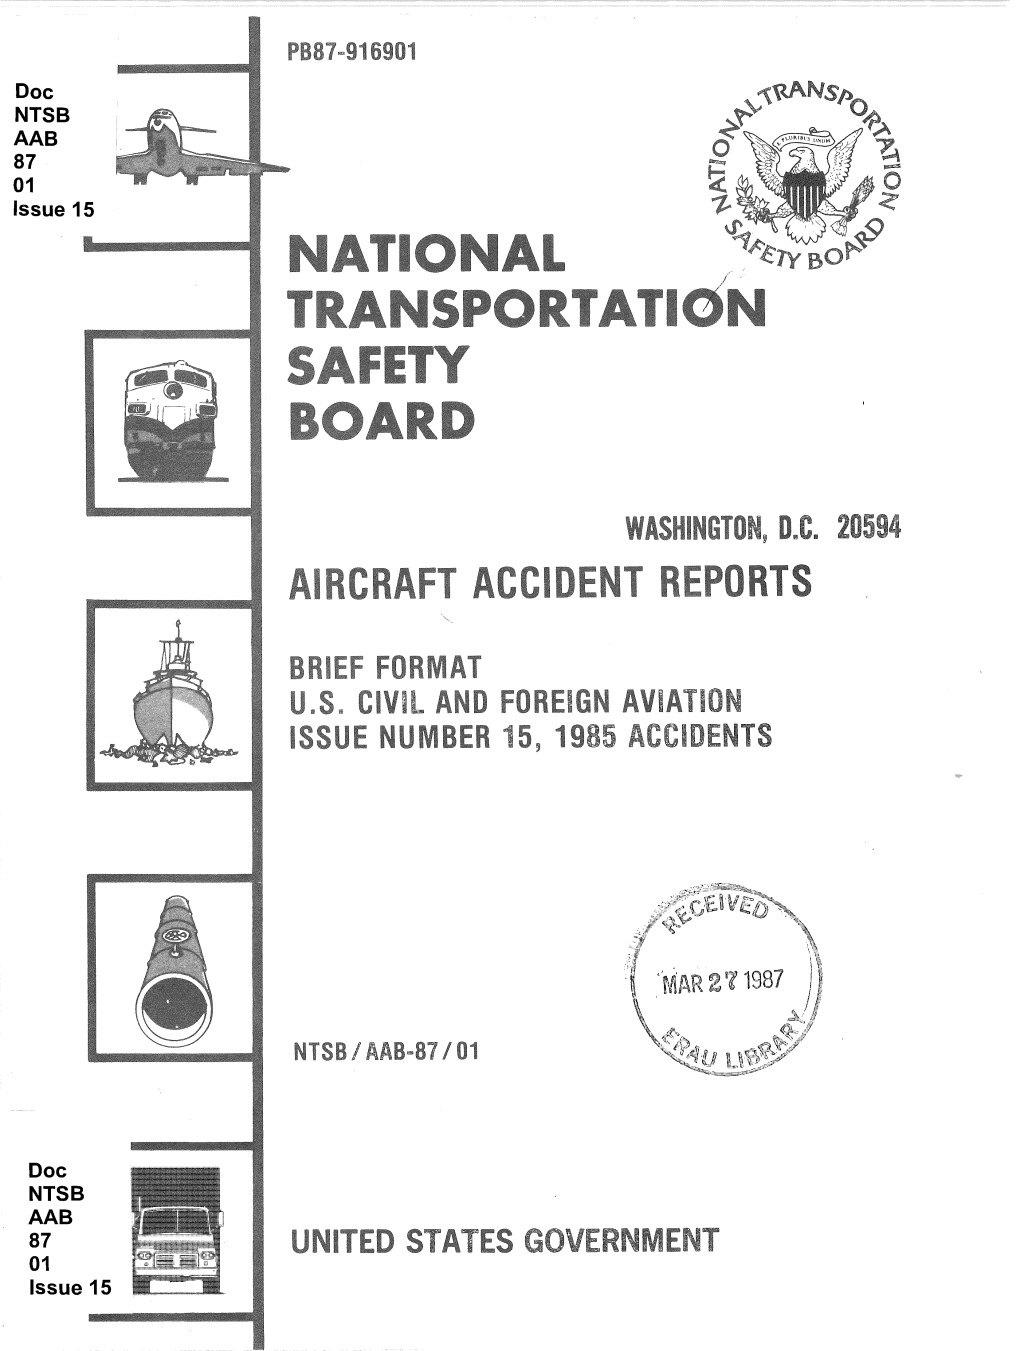 NTSB/AAB-87/01 PB87-916901 : Title and Subtitle 5.Report Date Aircraft Accident Briefs Brief Format Februar 3 1987 U.S